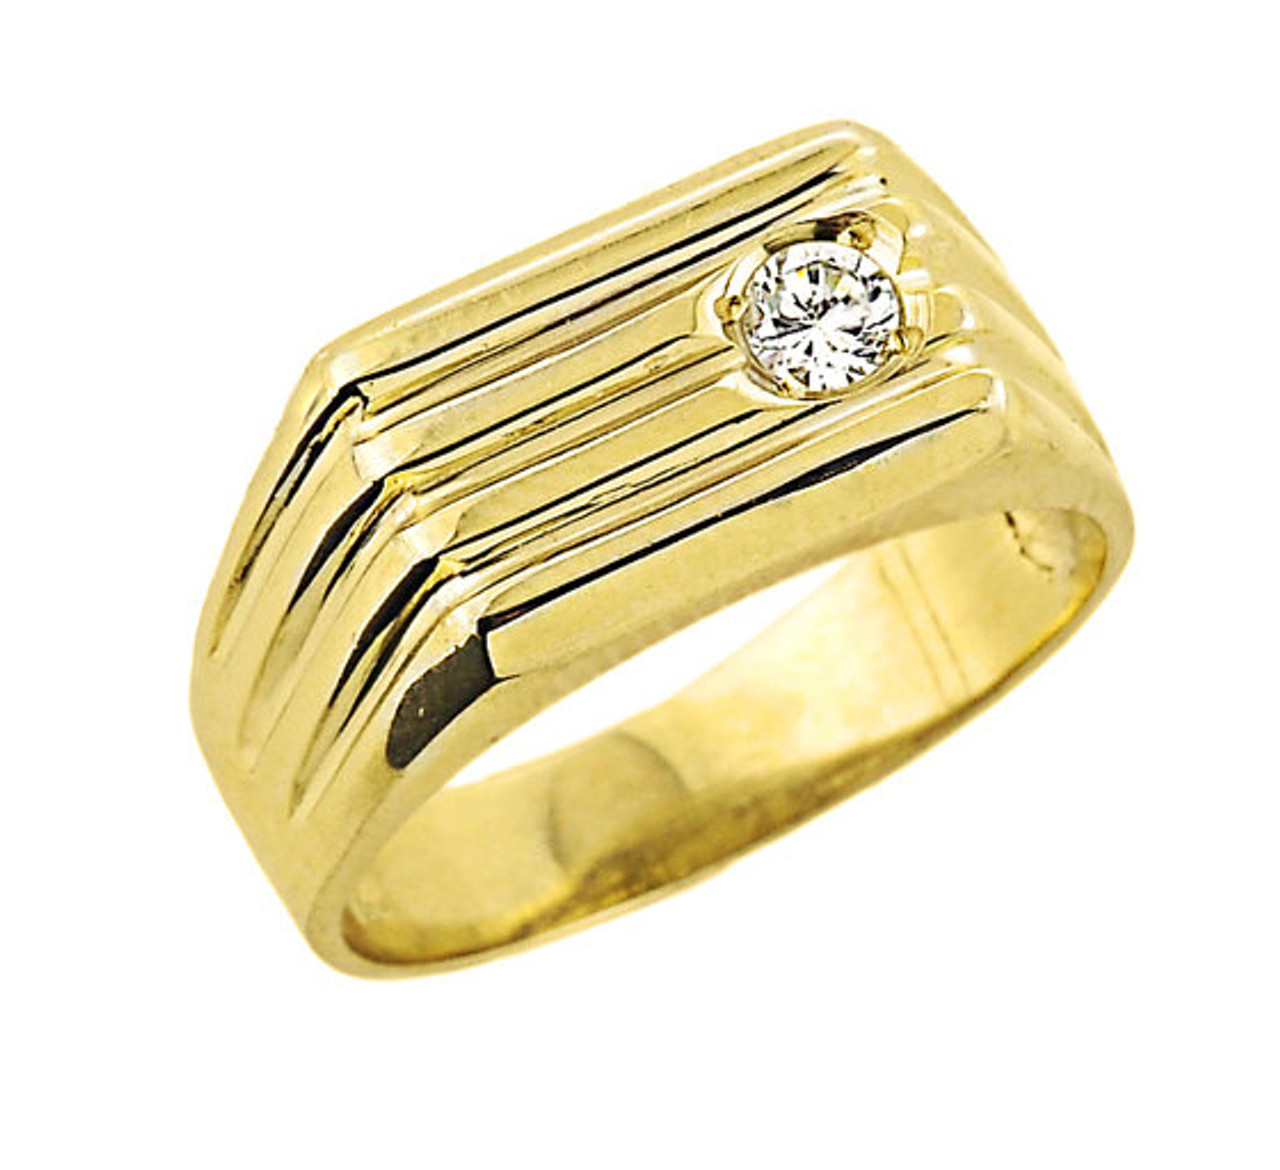 Designer Men's Diamond Open Nugget Pinky Ring in Solid Gold | Takar Jewelry